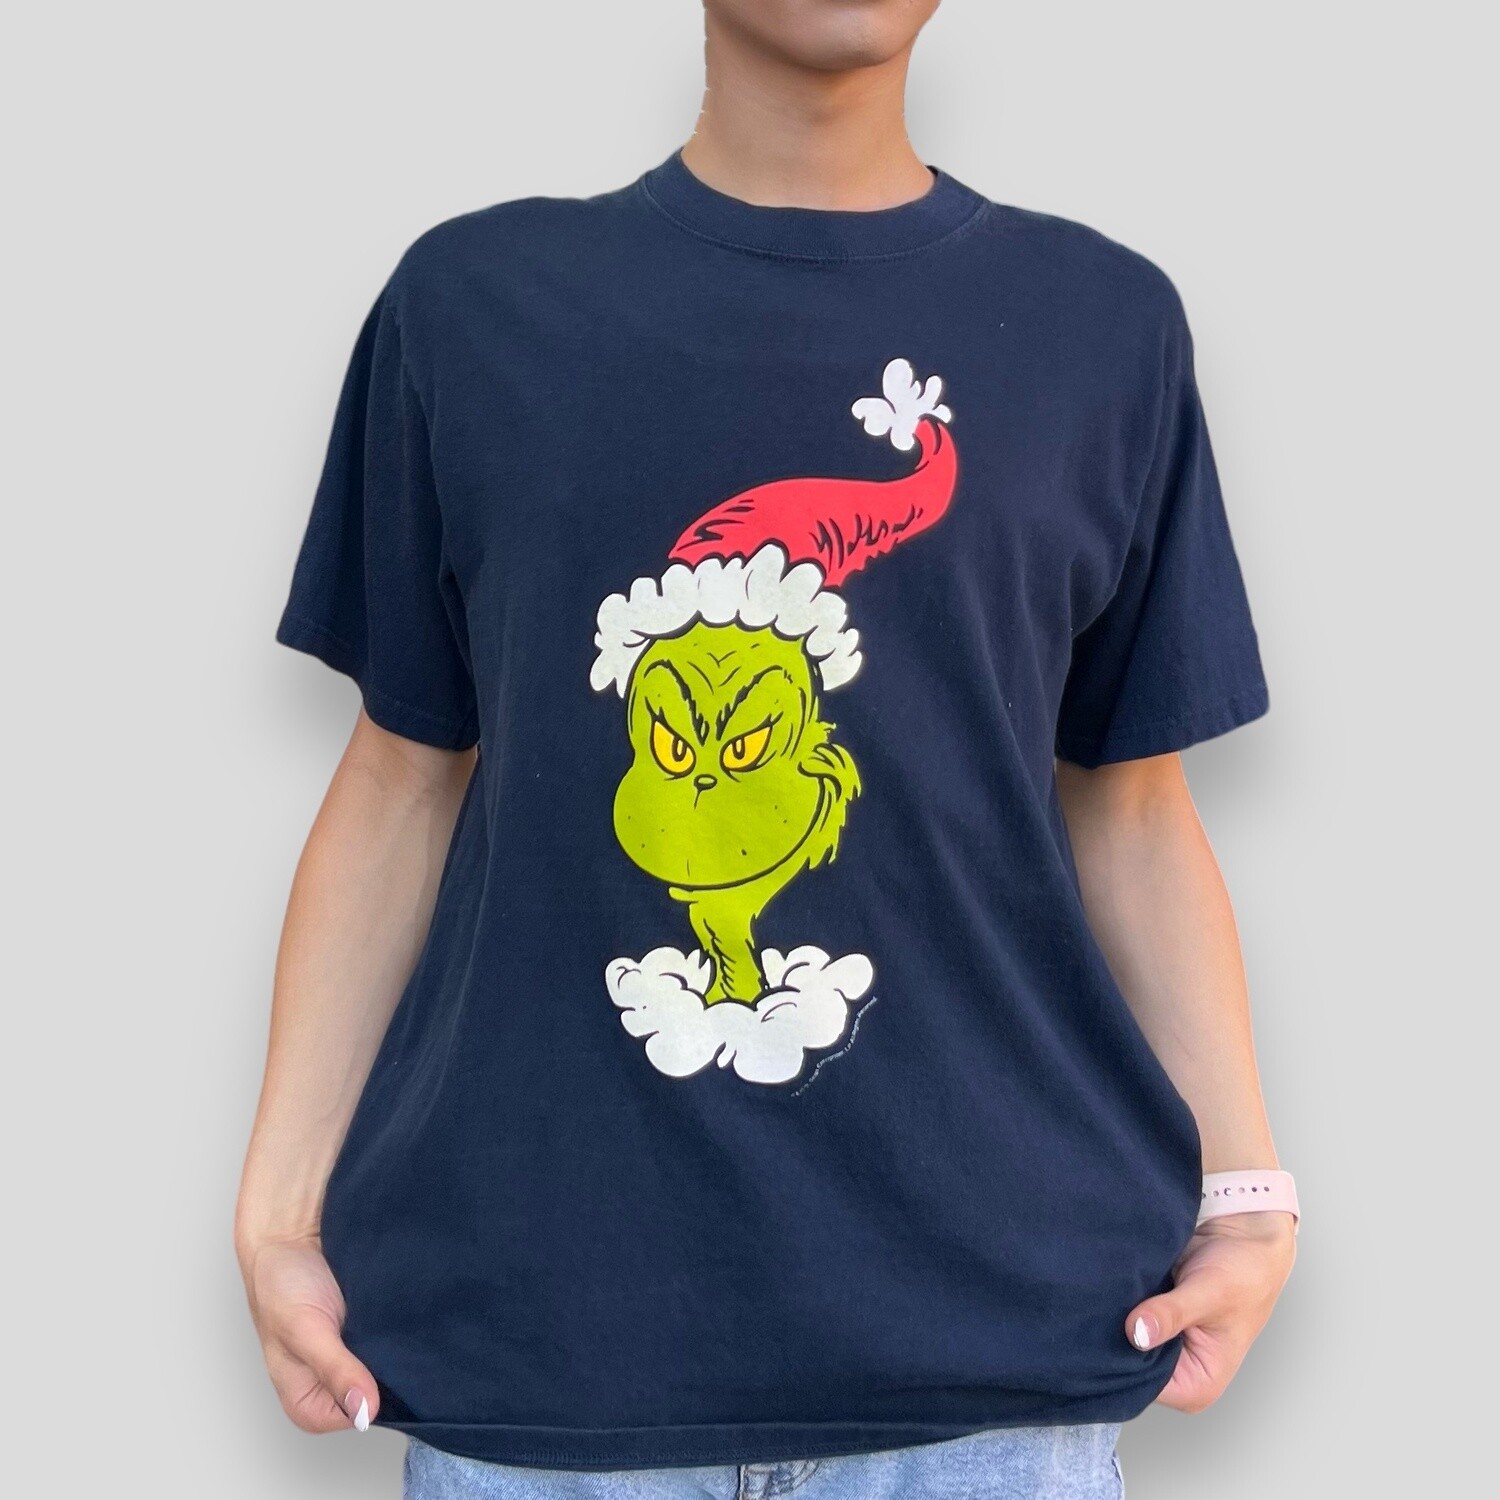 Vintage Dr Seuss Grinch Christmas Tee, Size: Large, Color: Blue, Style: Television